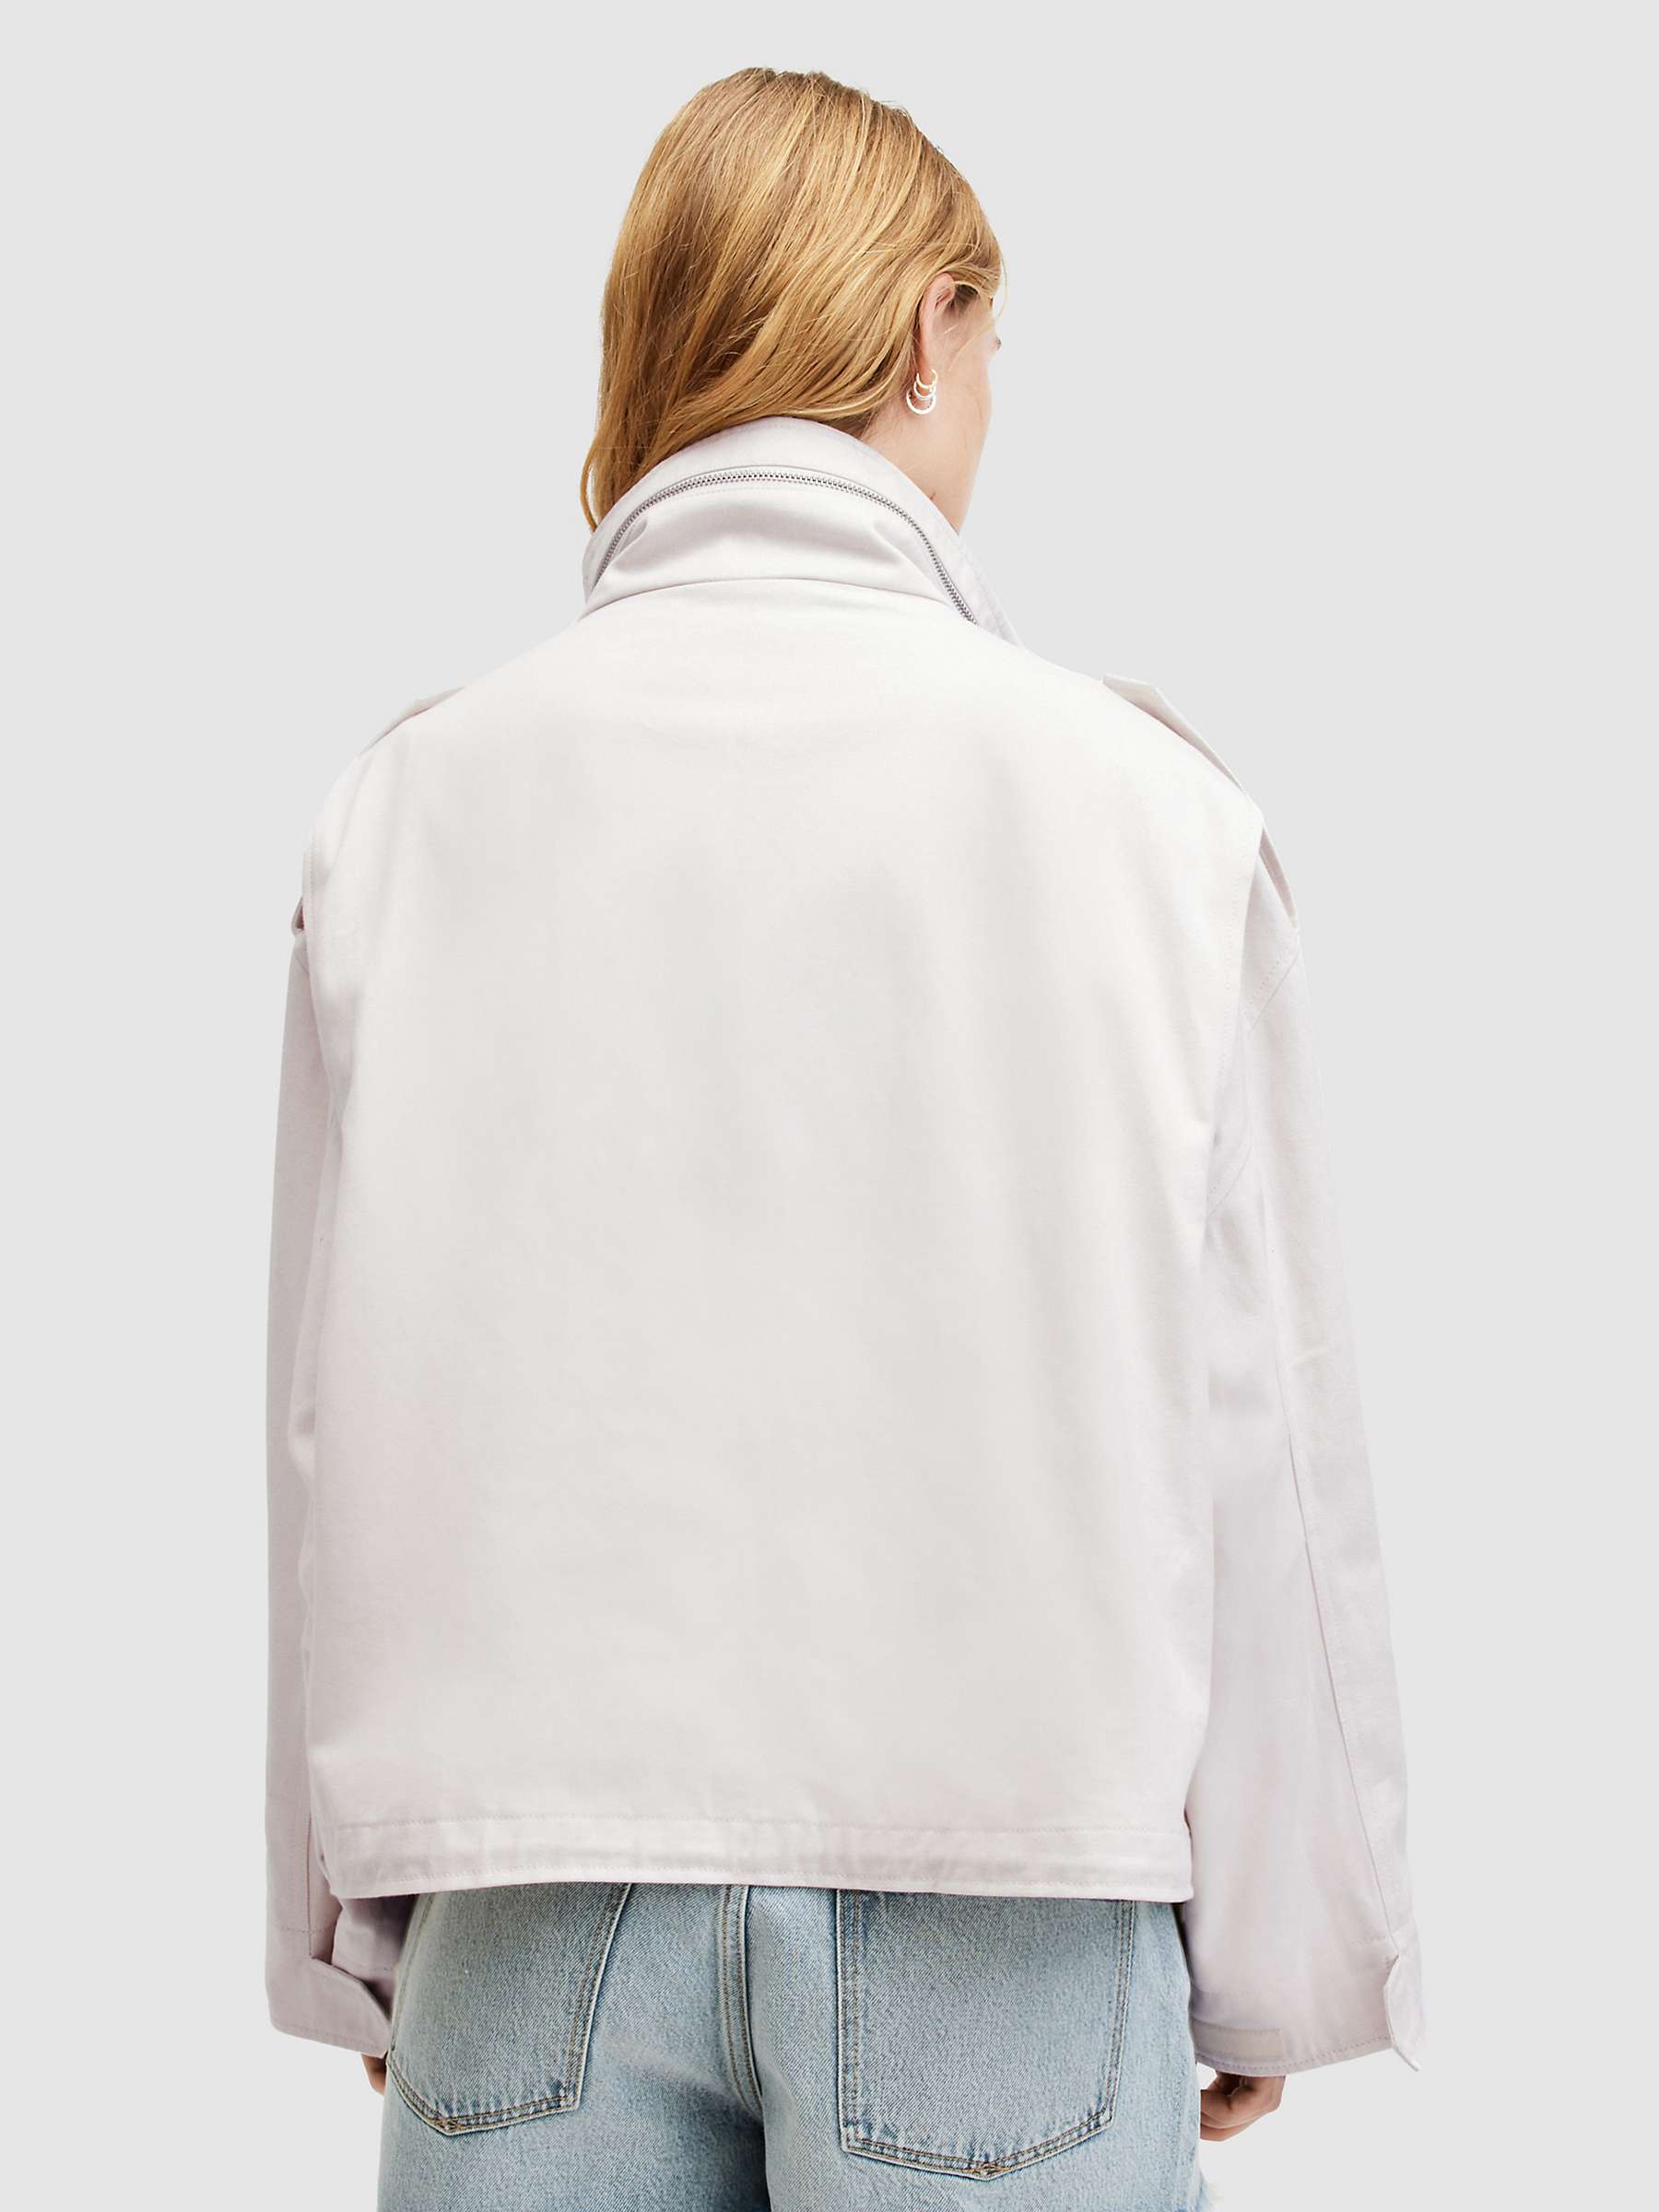 Buy AllSaints Amelia Relaxed Cotton Utility Jacket, White Sand Online at johnlewis.com